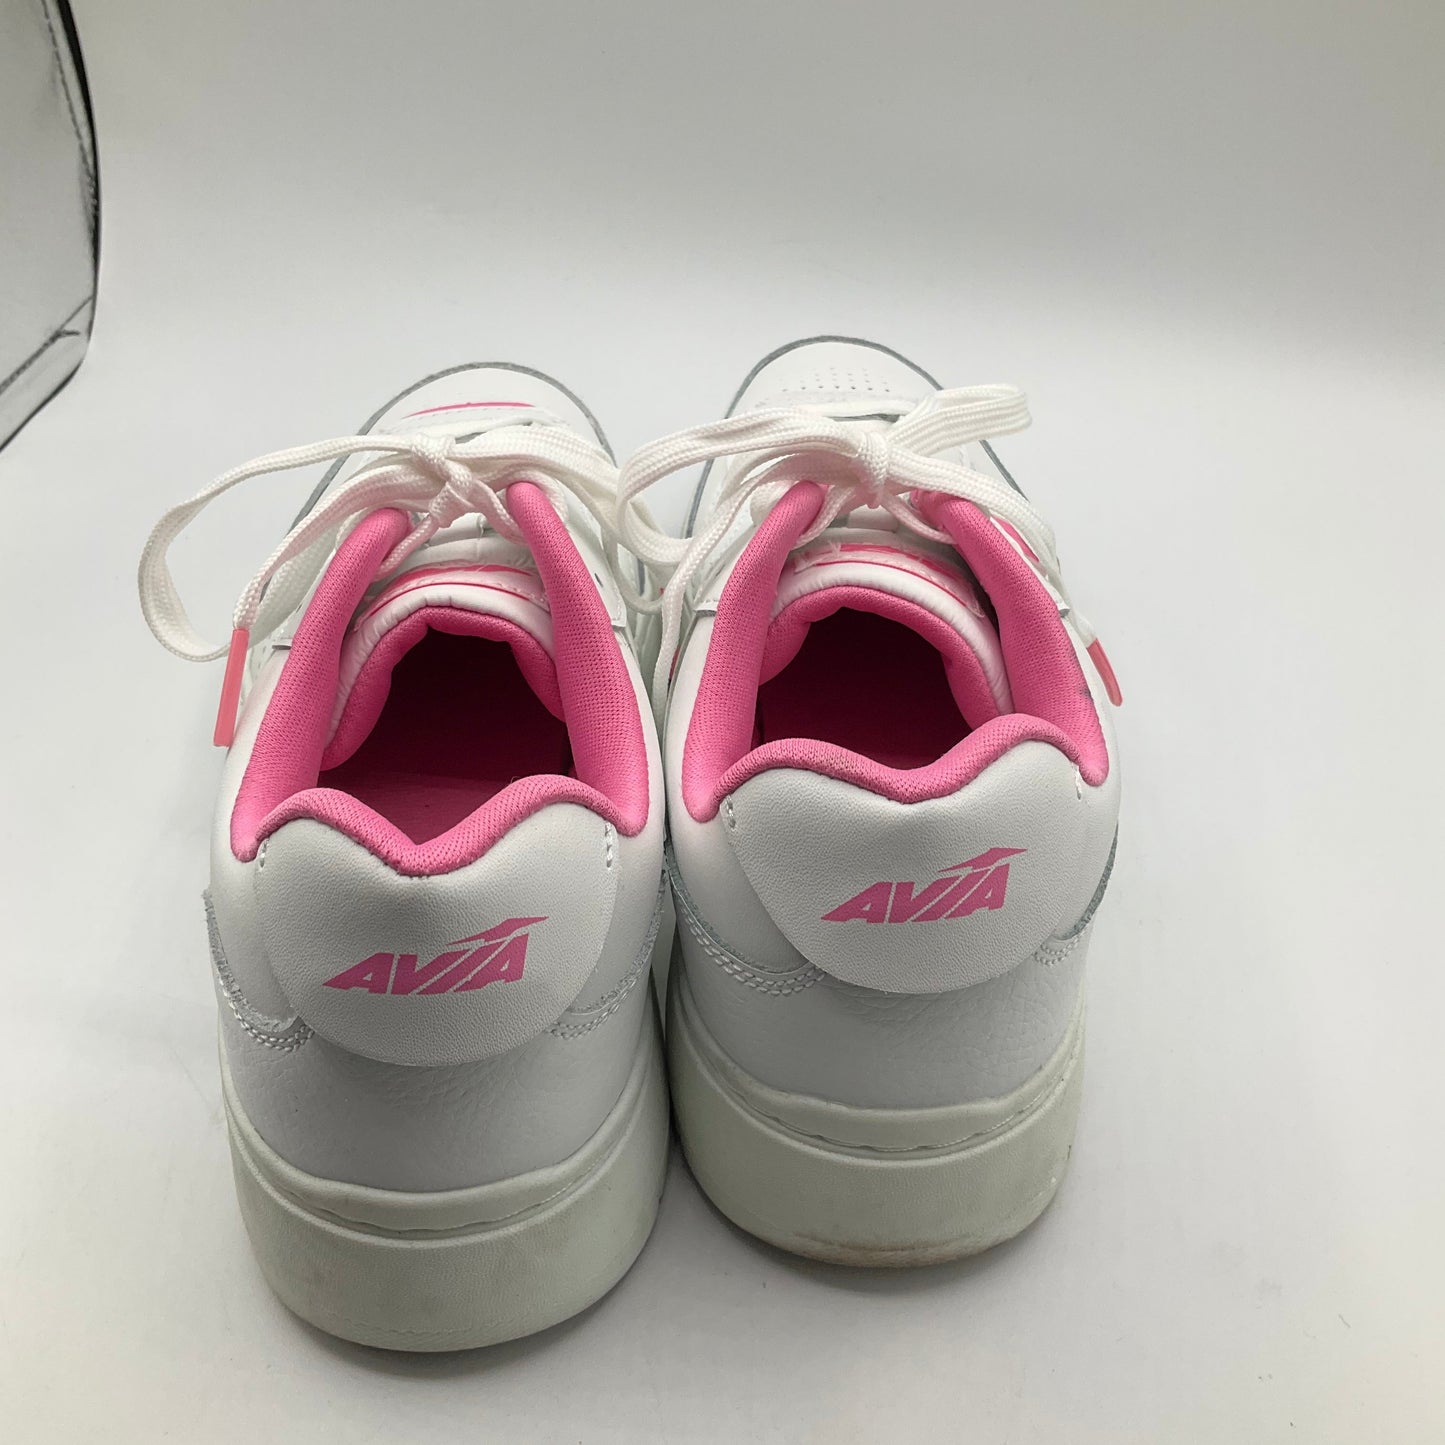 Shoes Sneakers By Avia  Size: 8